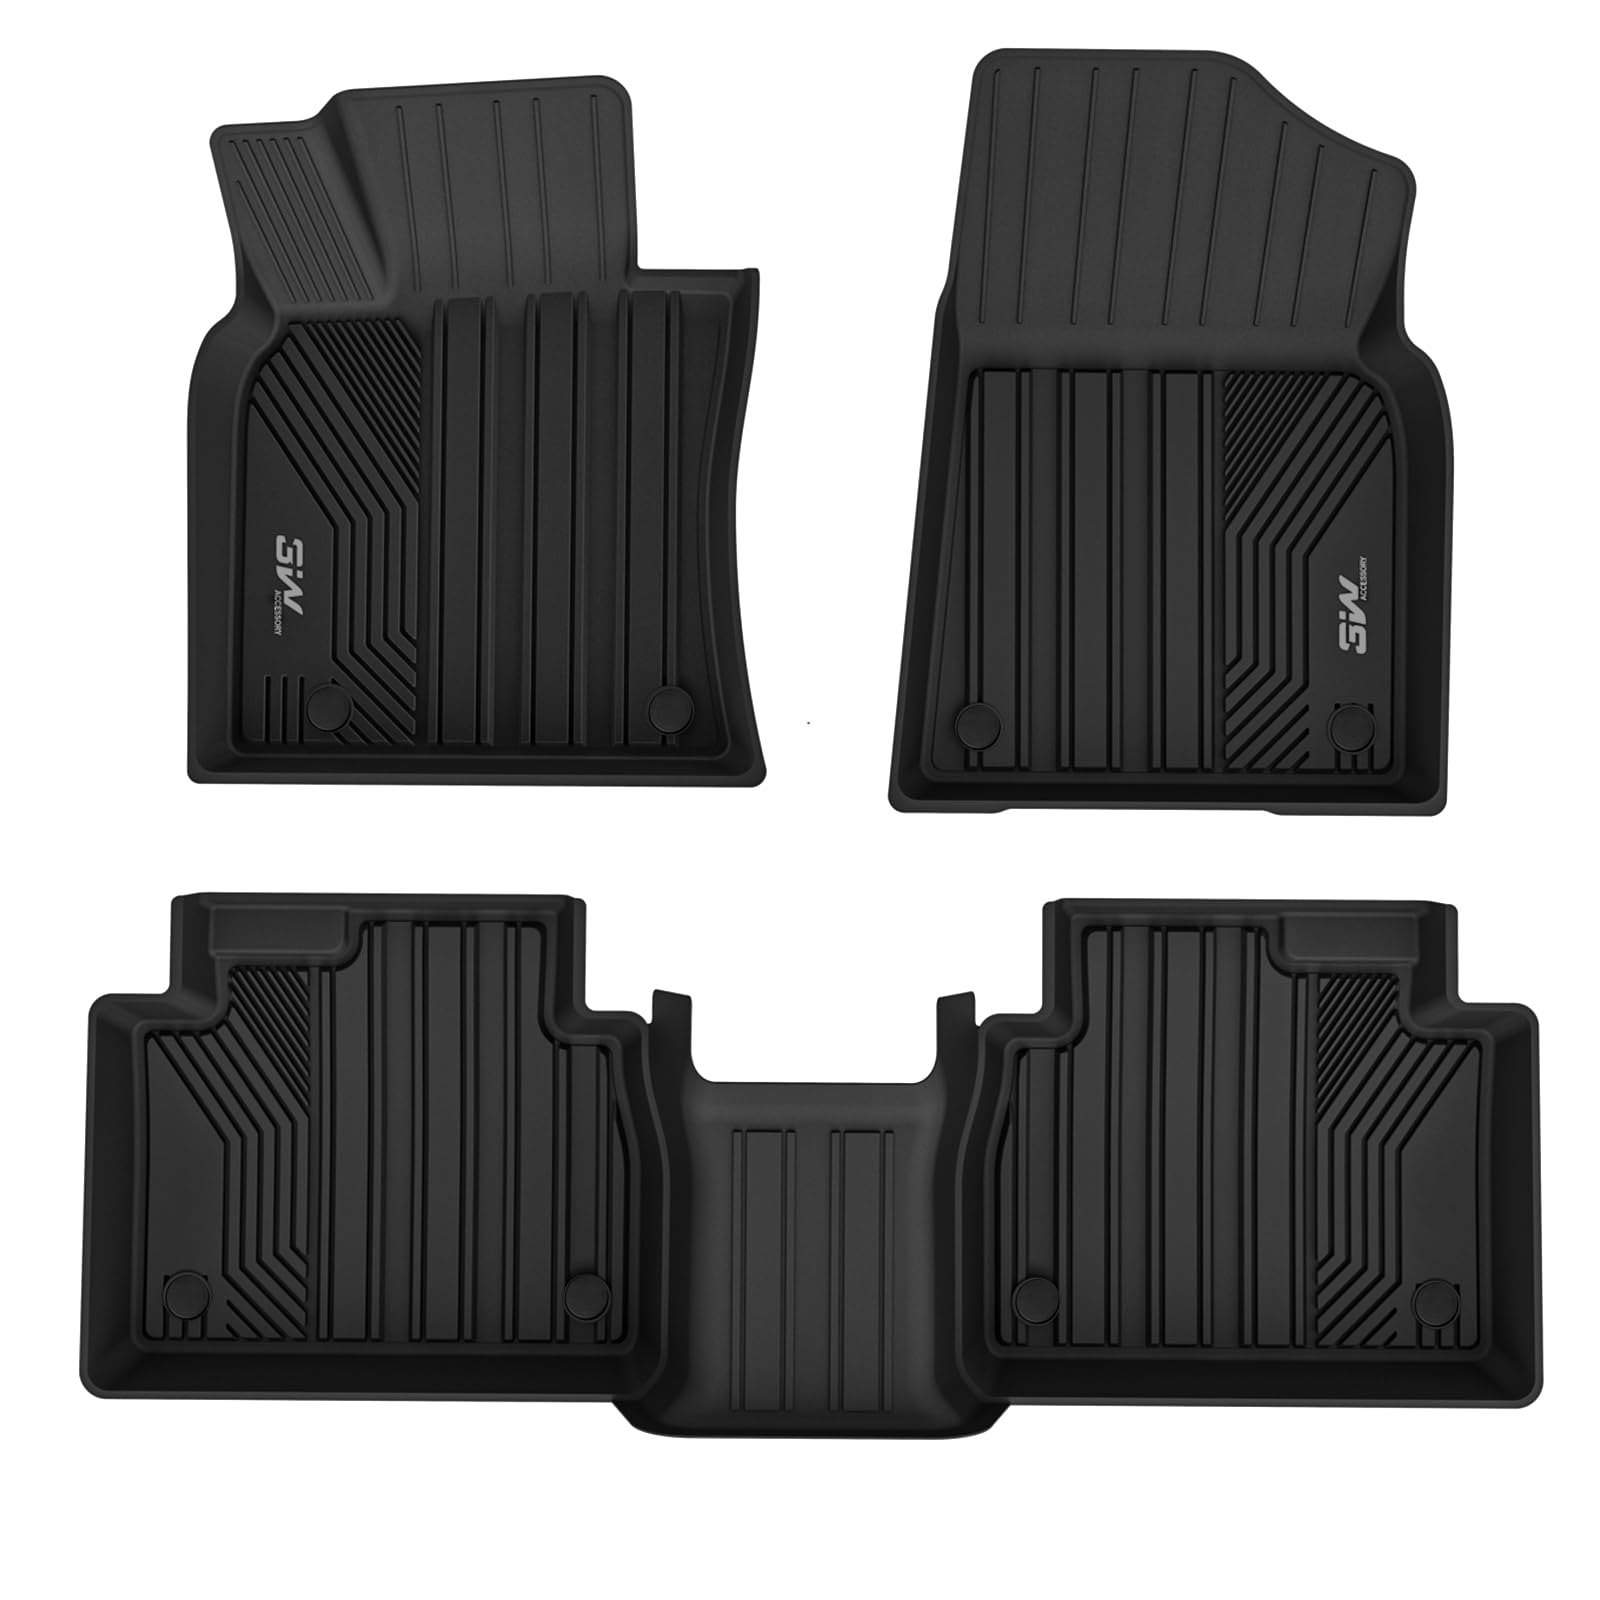 3W Toyota Camry 2018-2024 FWD (Not for Hybrid or AWD) Custom Floor Mats TPE Material & All-Weather Protection Vehicles & Parts 3Wliners 2018-2024 Camry 2018-2024 1st&2nd Row Mats